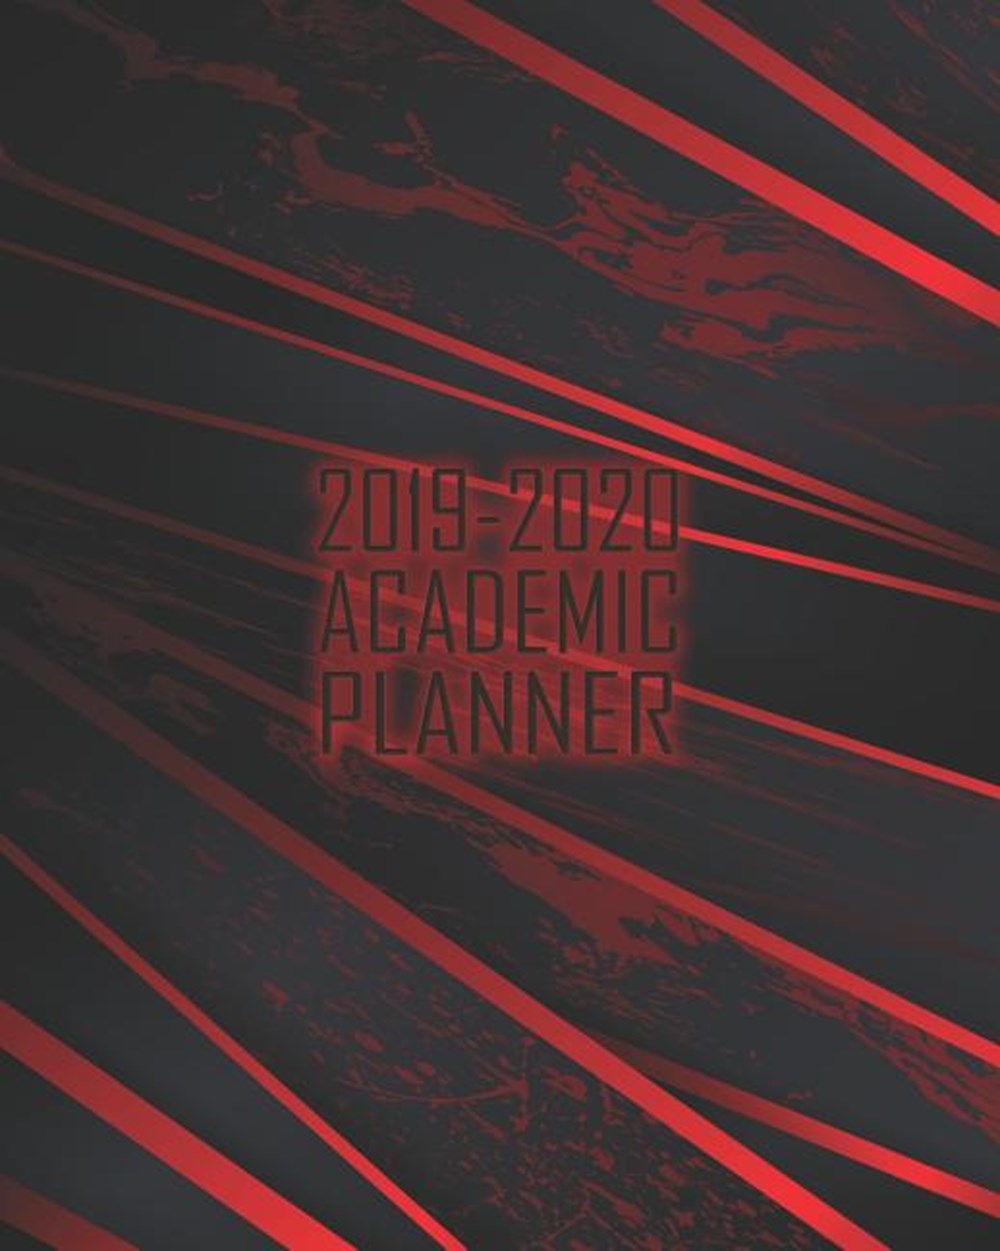 Academic Planner 2019-2020 Bold Black Red Modern Heavy Metal Abstract Weekly & Monthly Dated High Sc